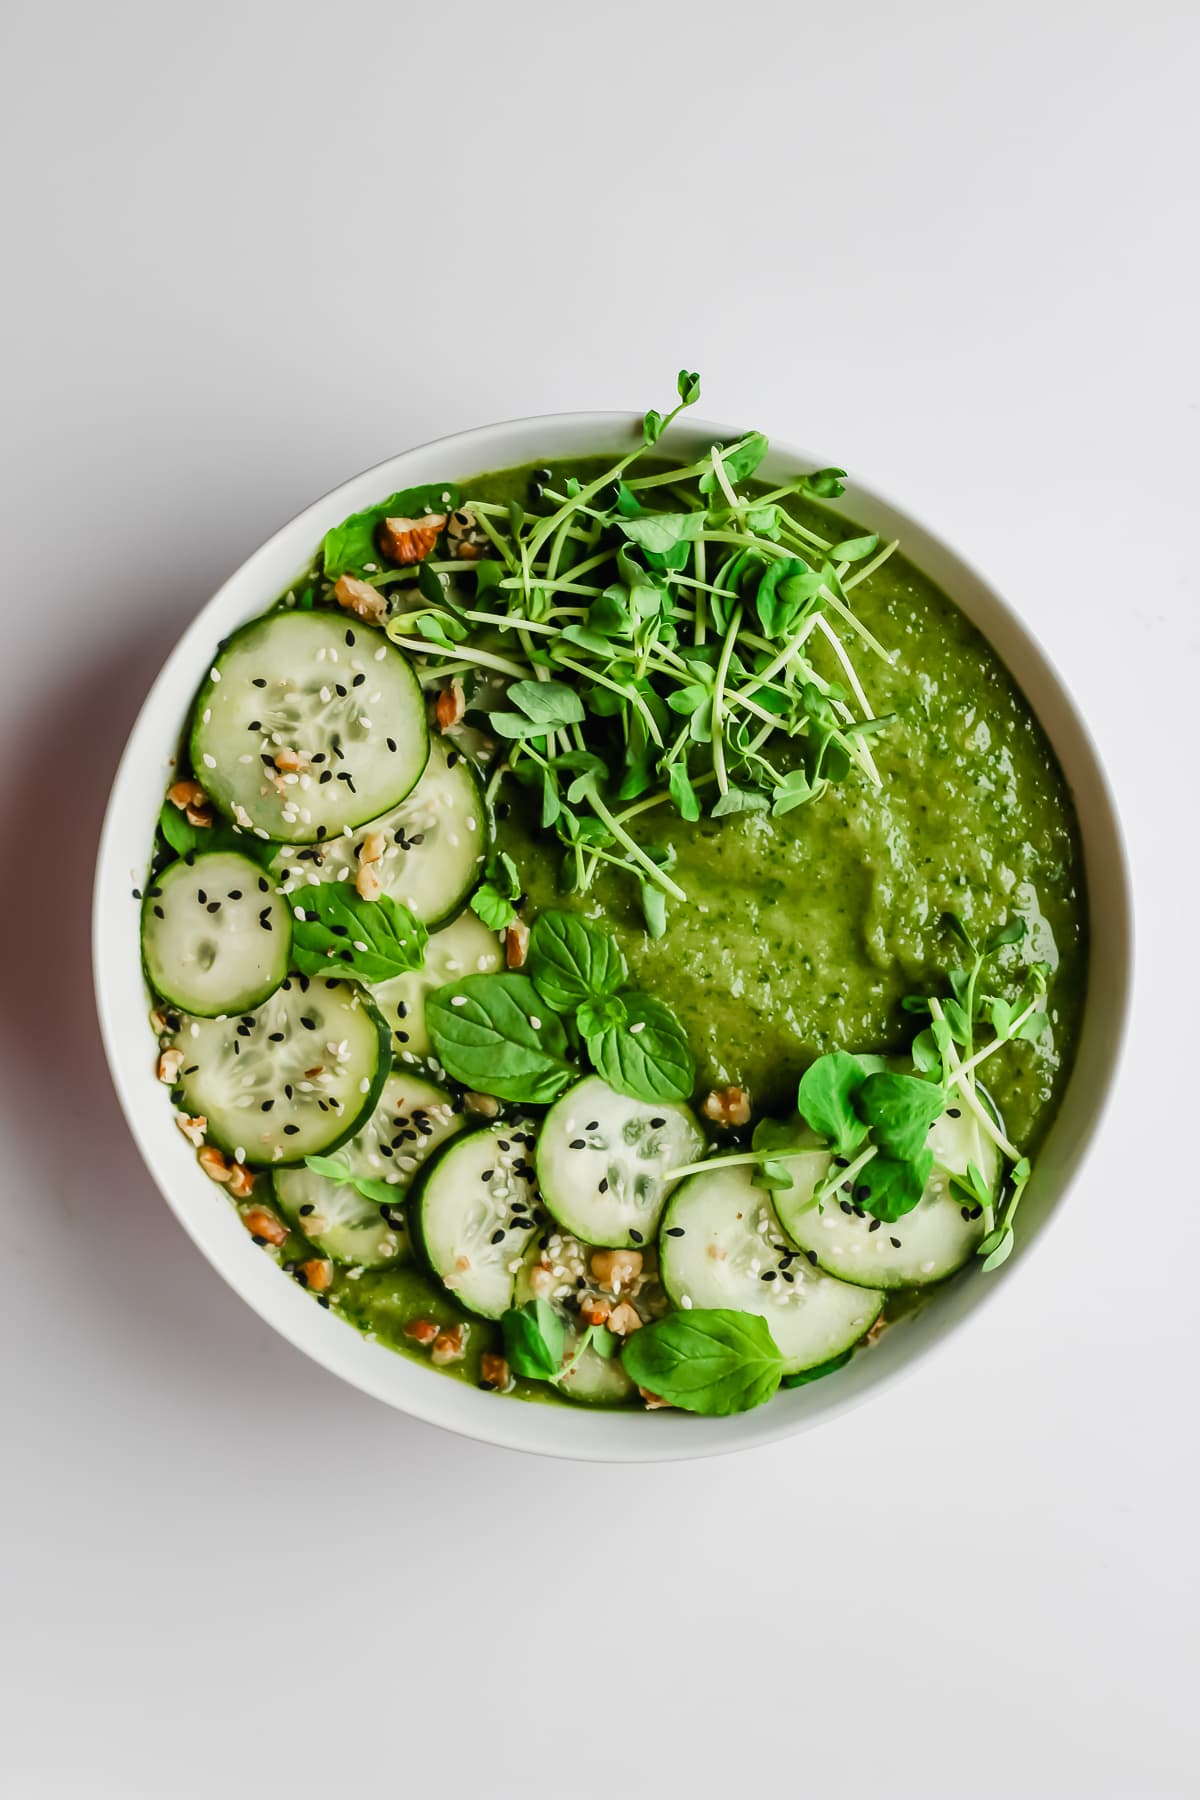 A garnished healthy green smoothie bowl.